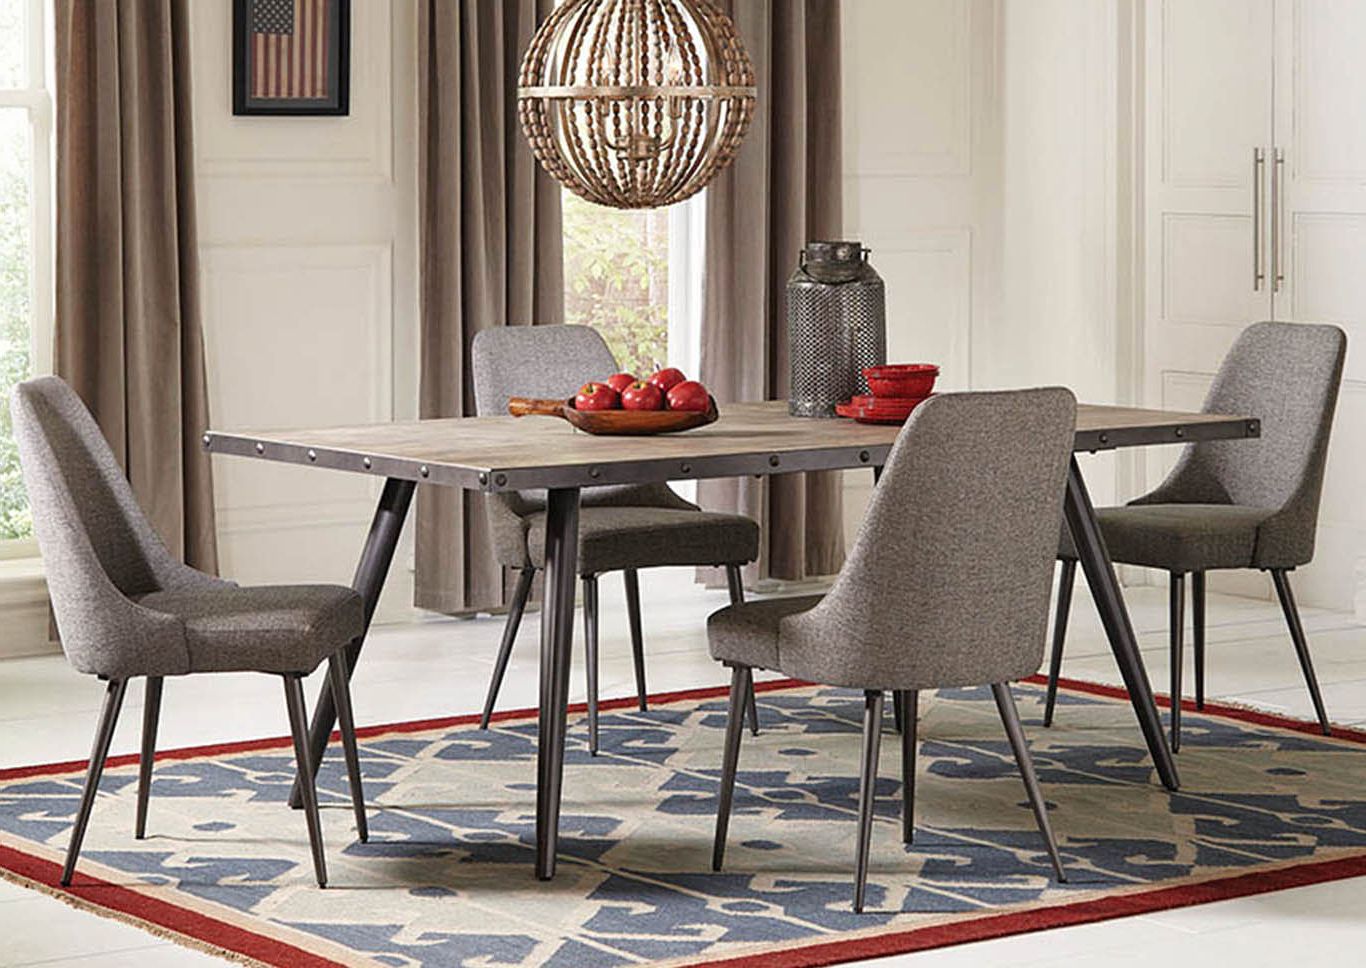 Modern Dining Room Tables 6 Seat